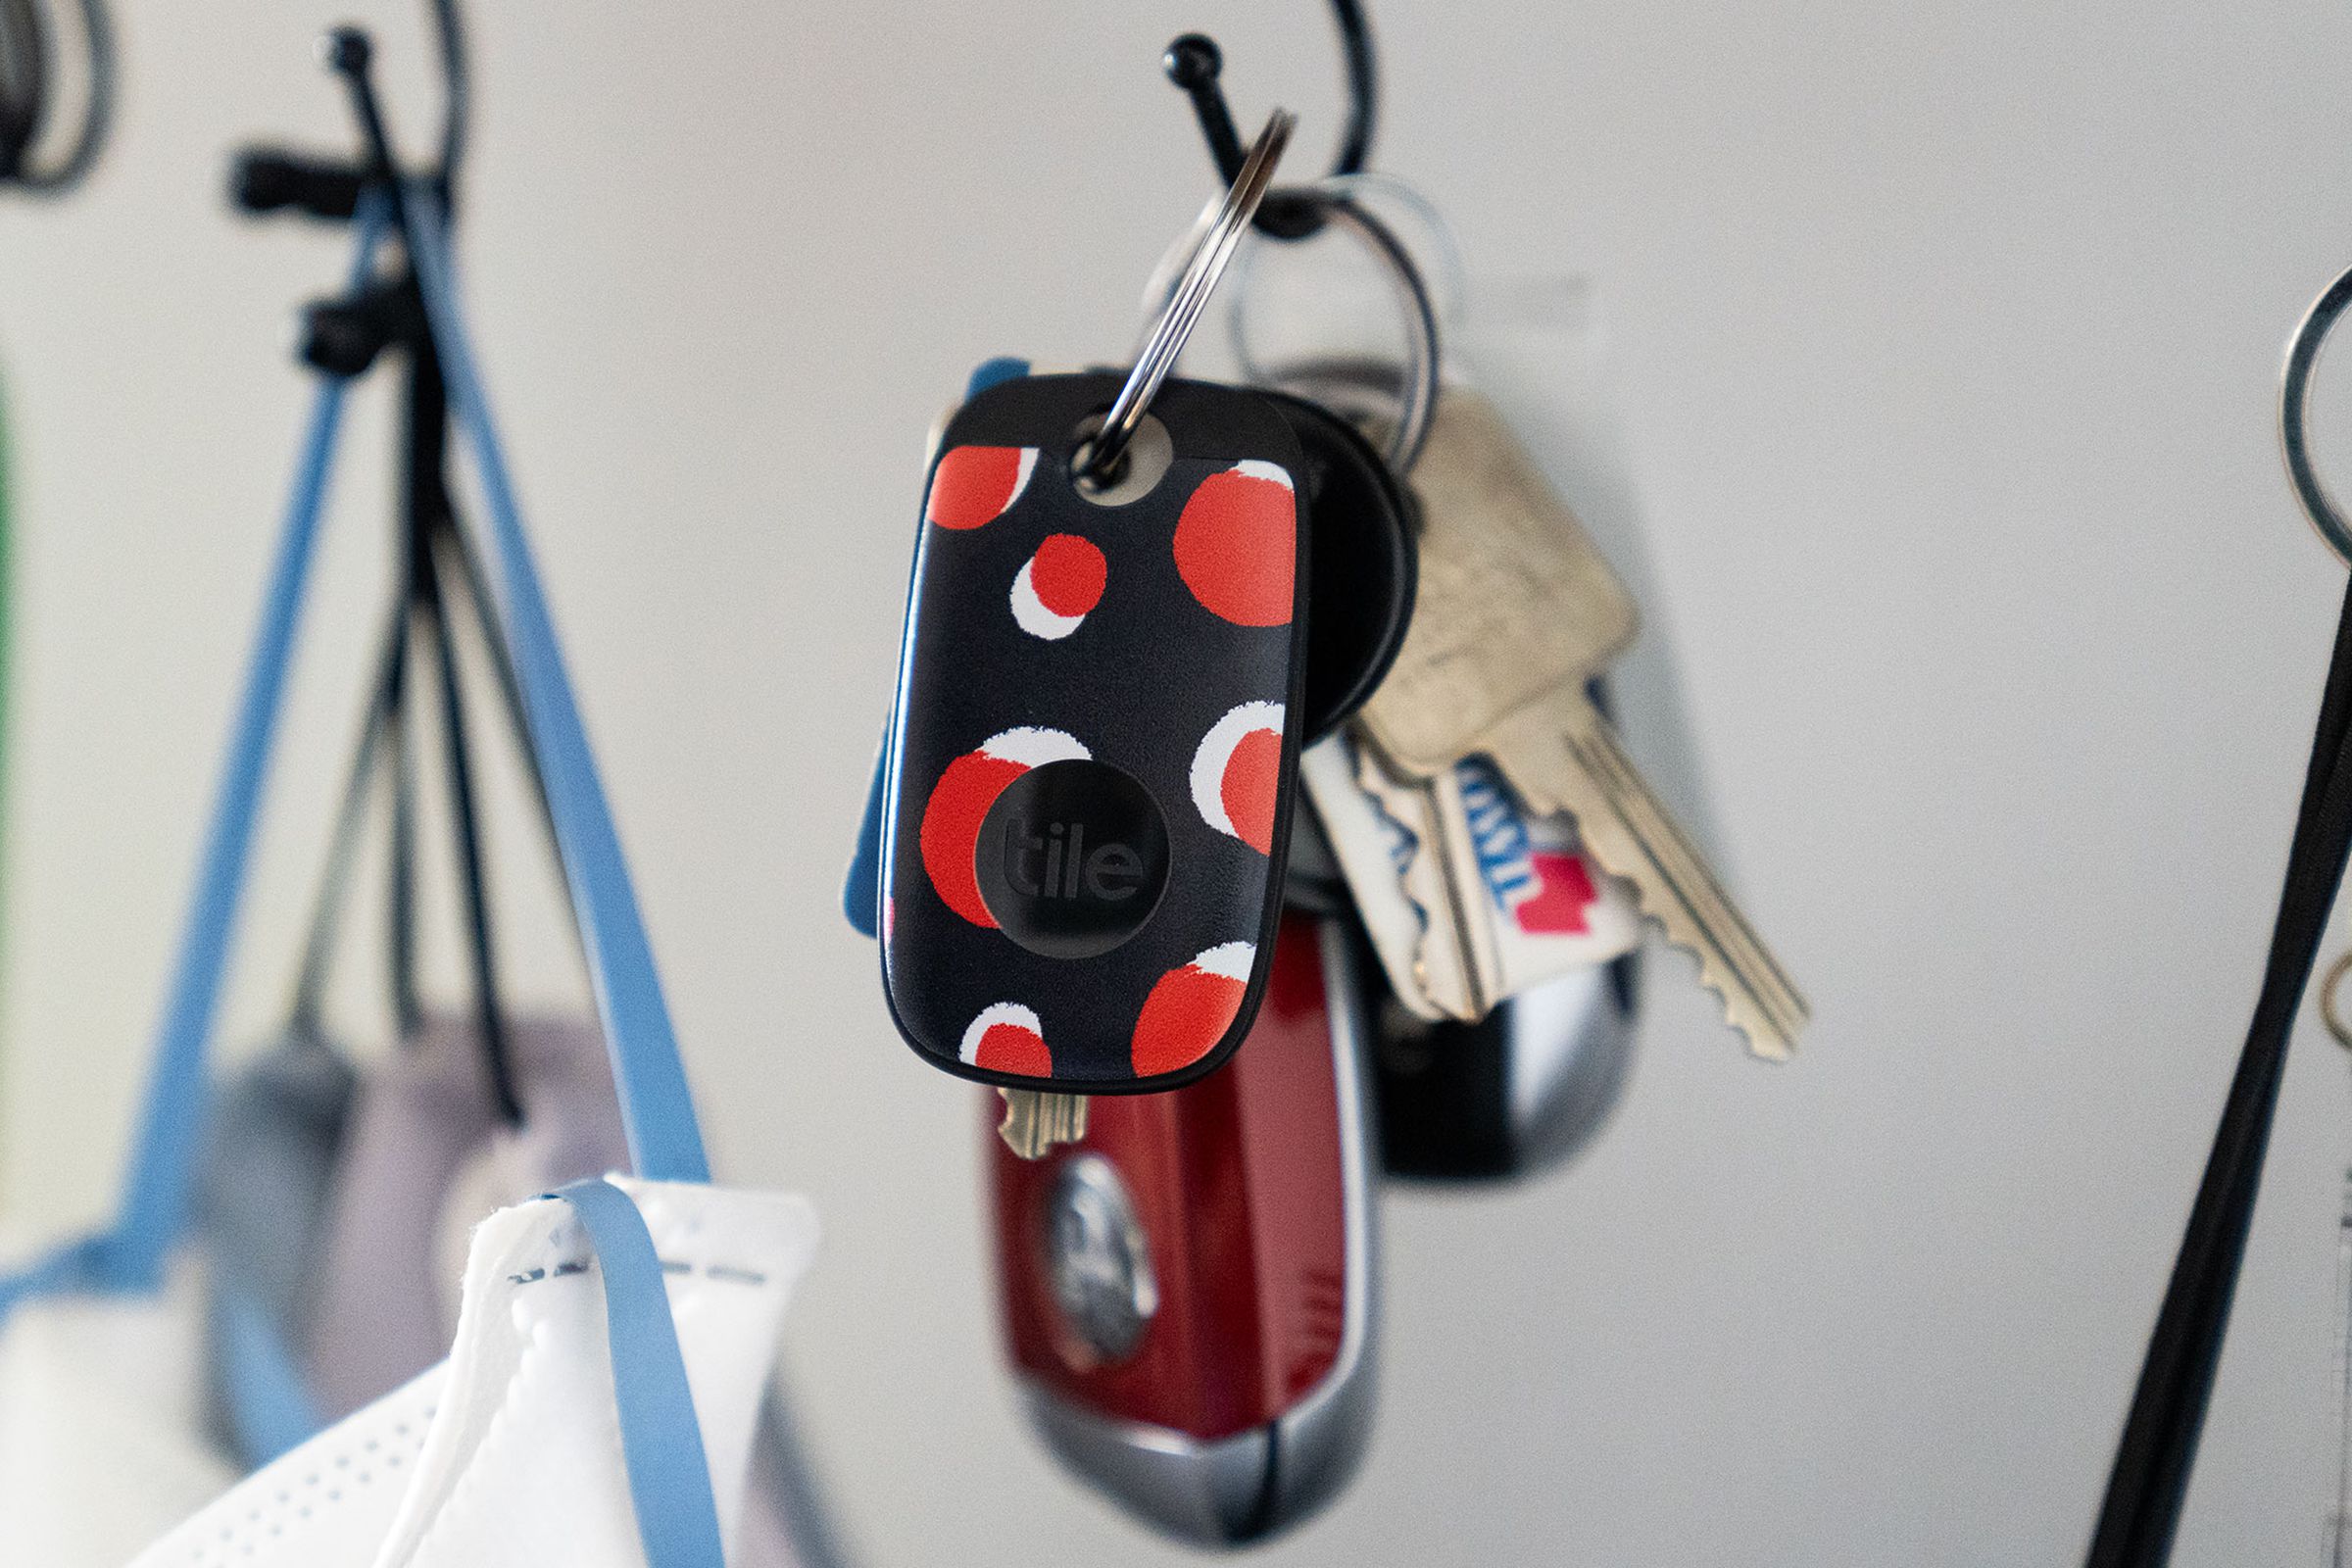 Colorful Tile Pro hanging from a key ring on a hook